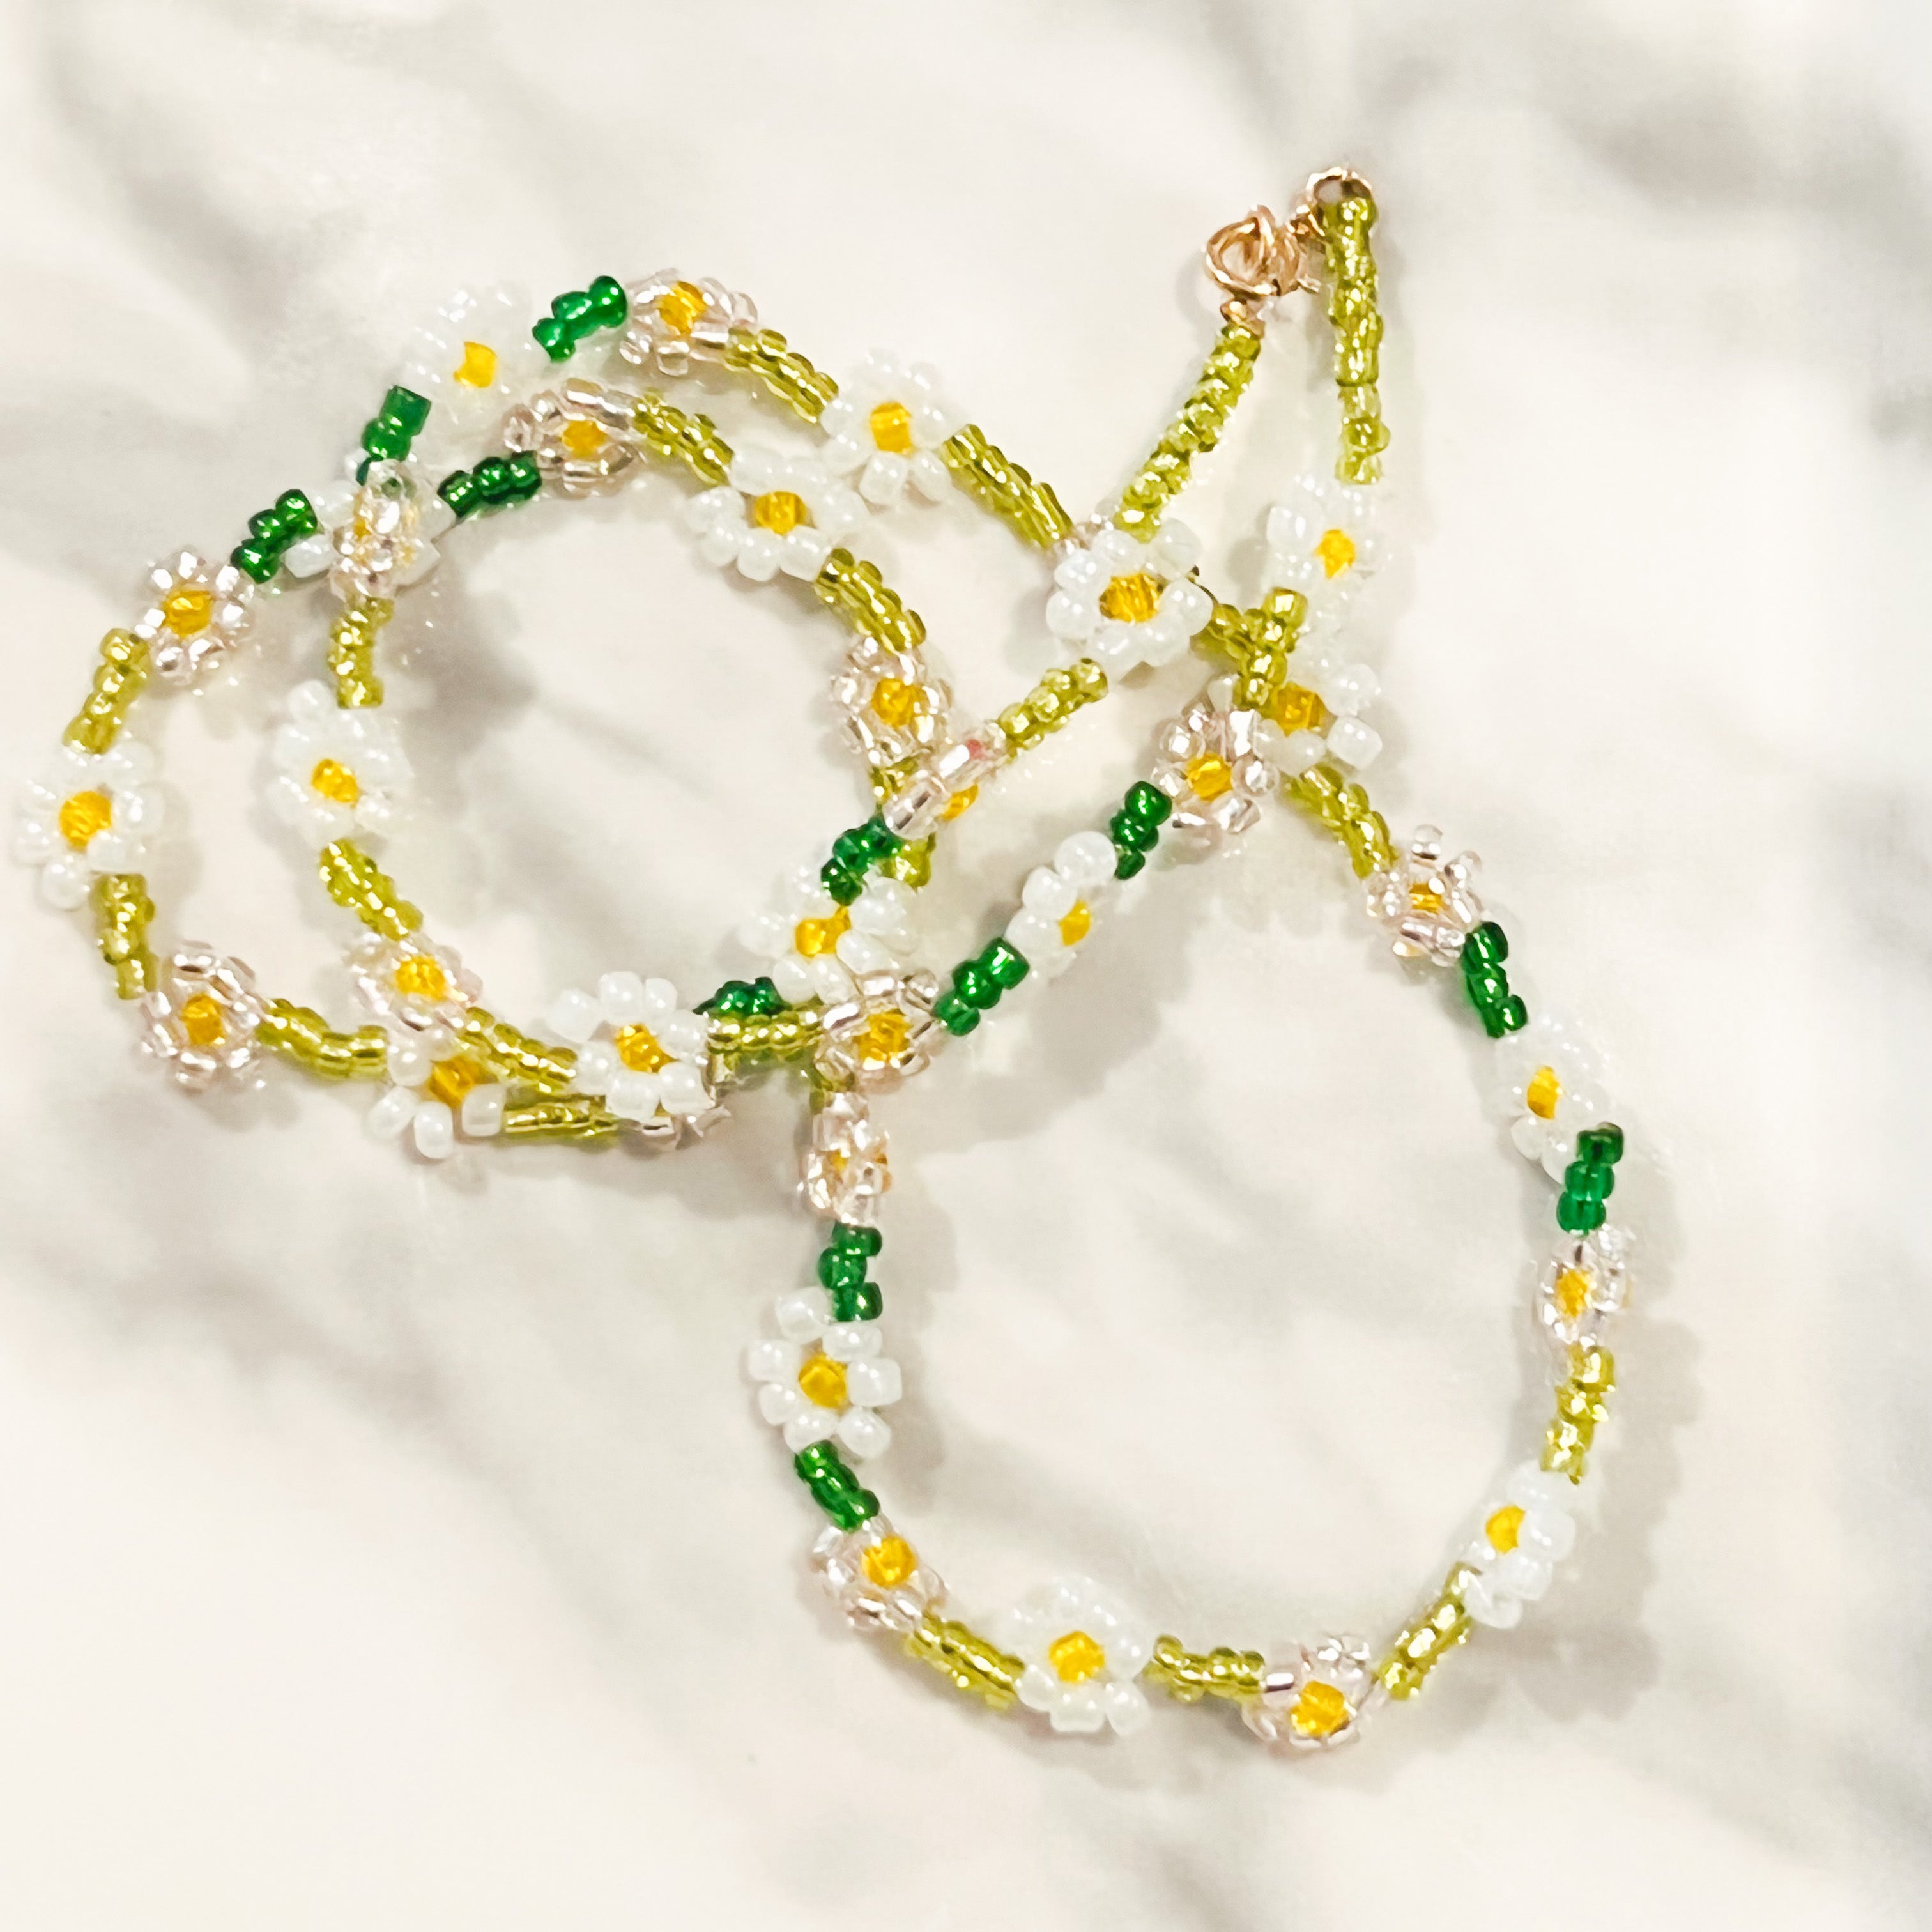 Beaded Daisy Necklace – Girls Downtown